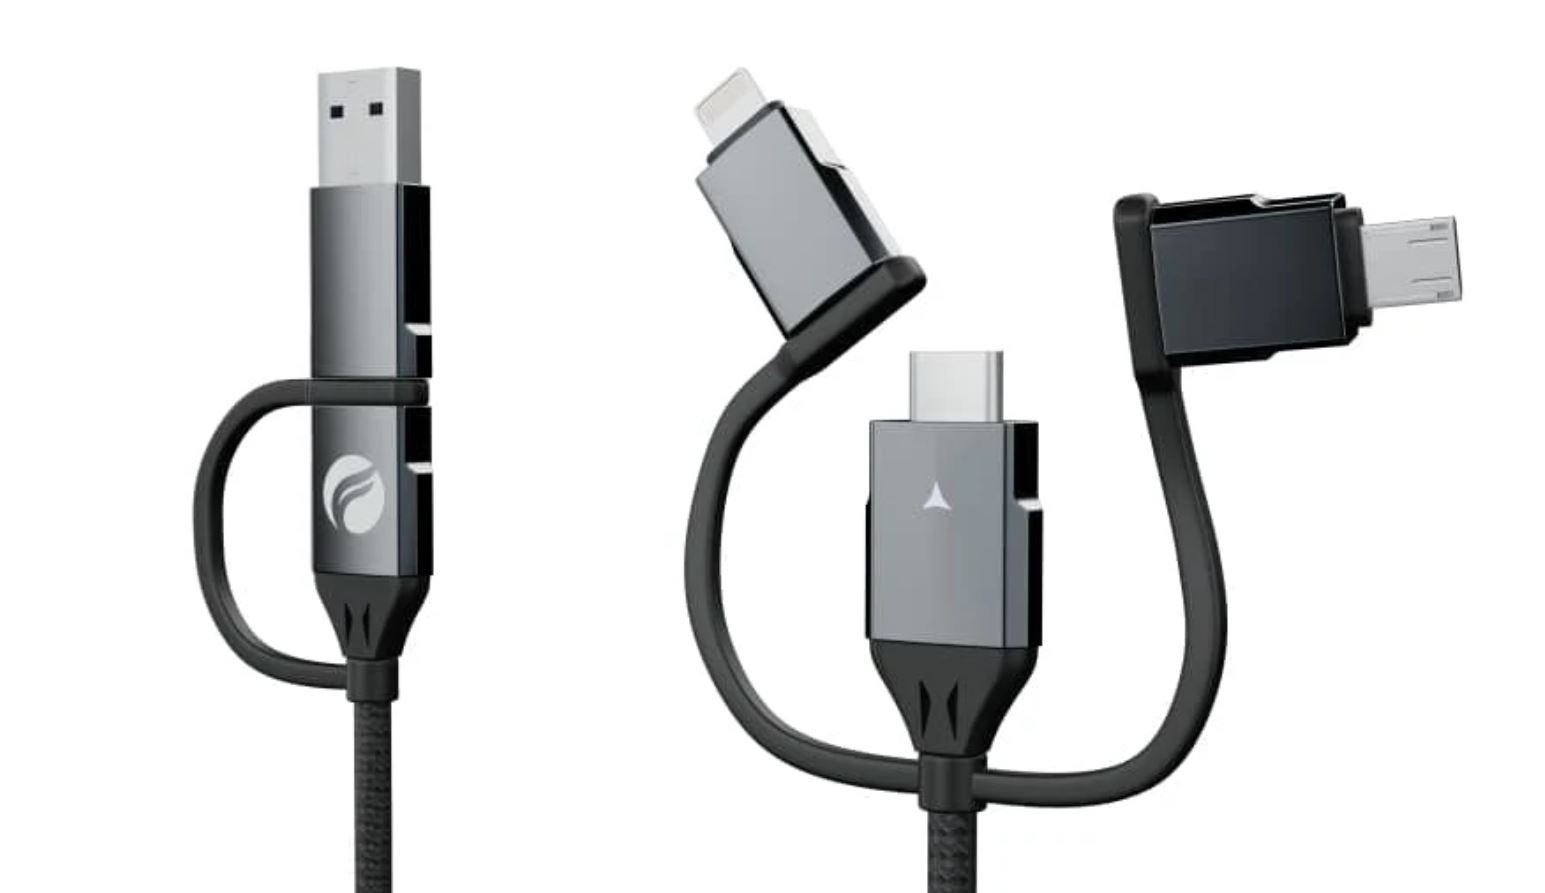 USB and Thunderbolt cables